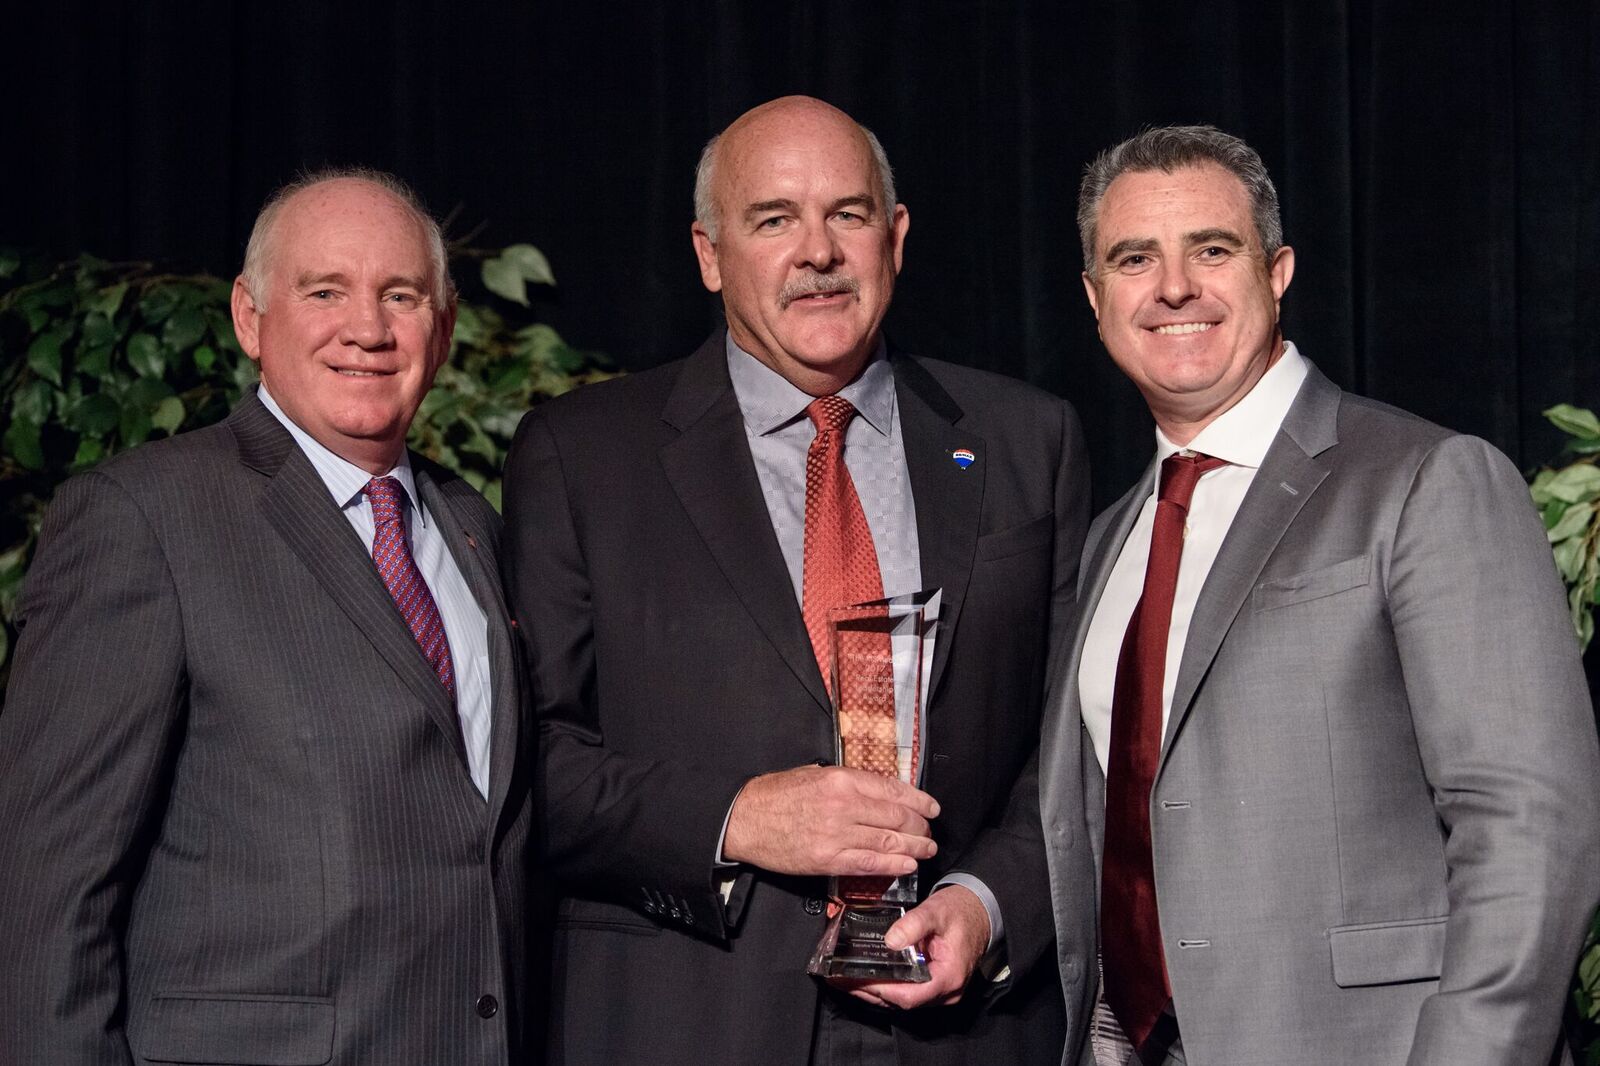 Mike Ryan (center), EVP of RE/MAX, accepts the RISMedia Real Estate Leadership Award, with Featherston (left) and Dermot Buffini (right), CEO of Buffini & Company, sponsor of the award.